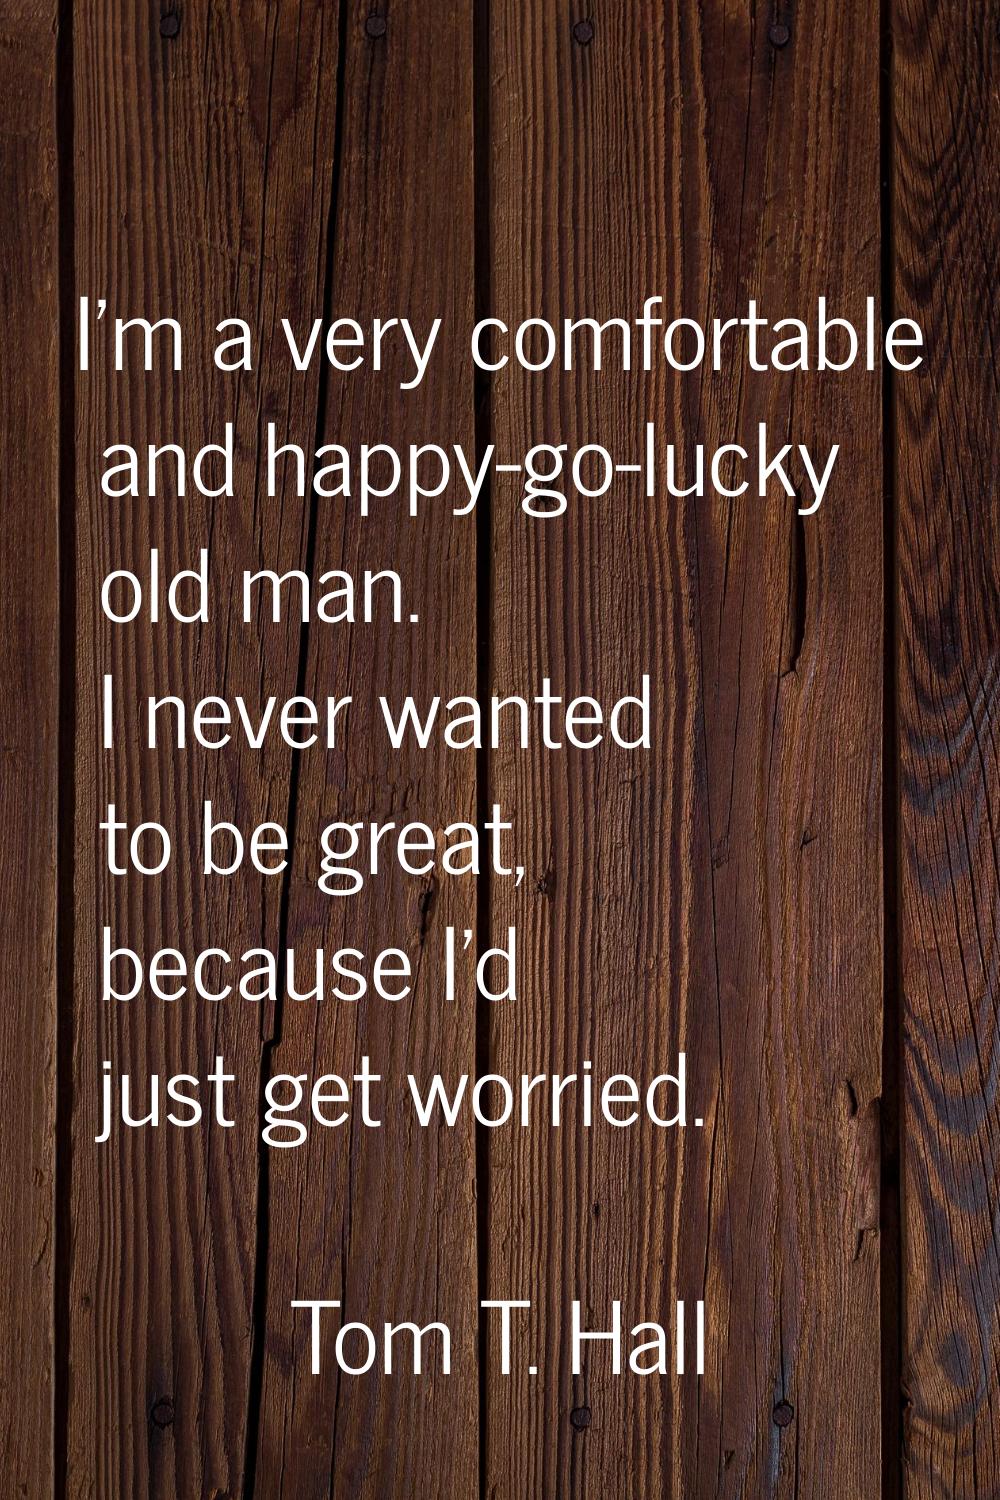 I'm a very comfortable and happy-go-lucky old man. I never wanted to be great, because I'd just get